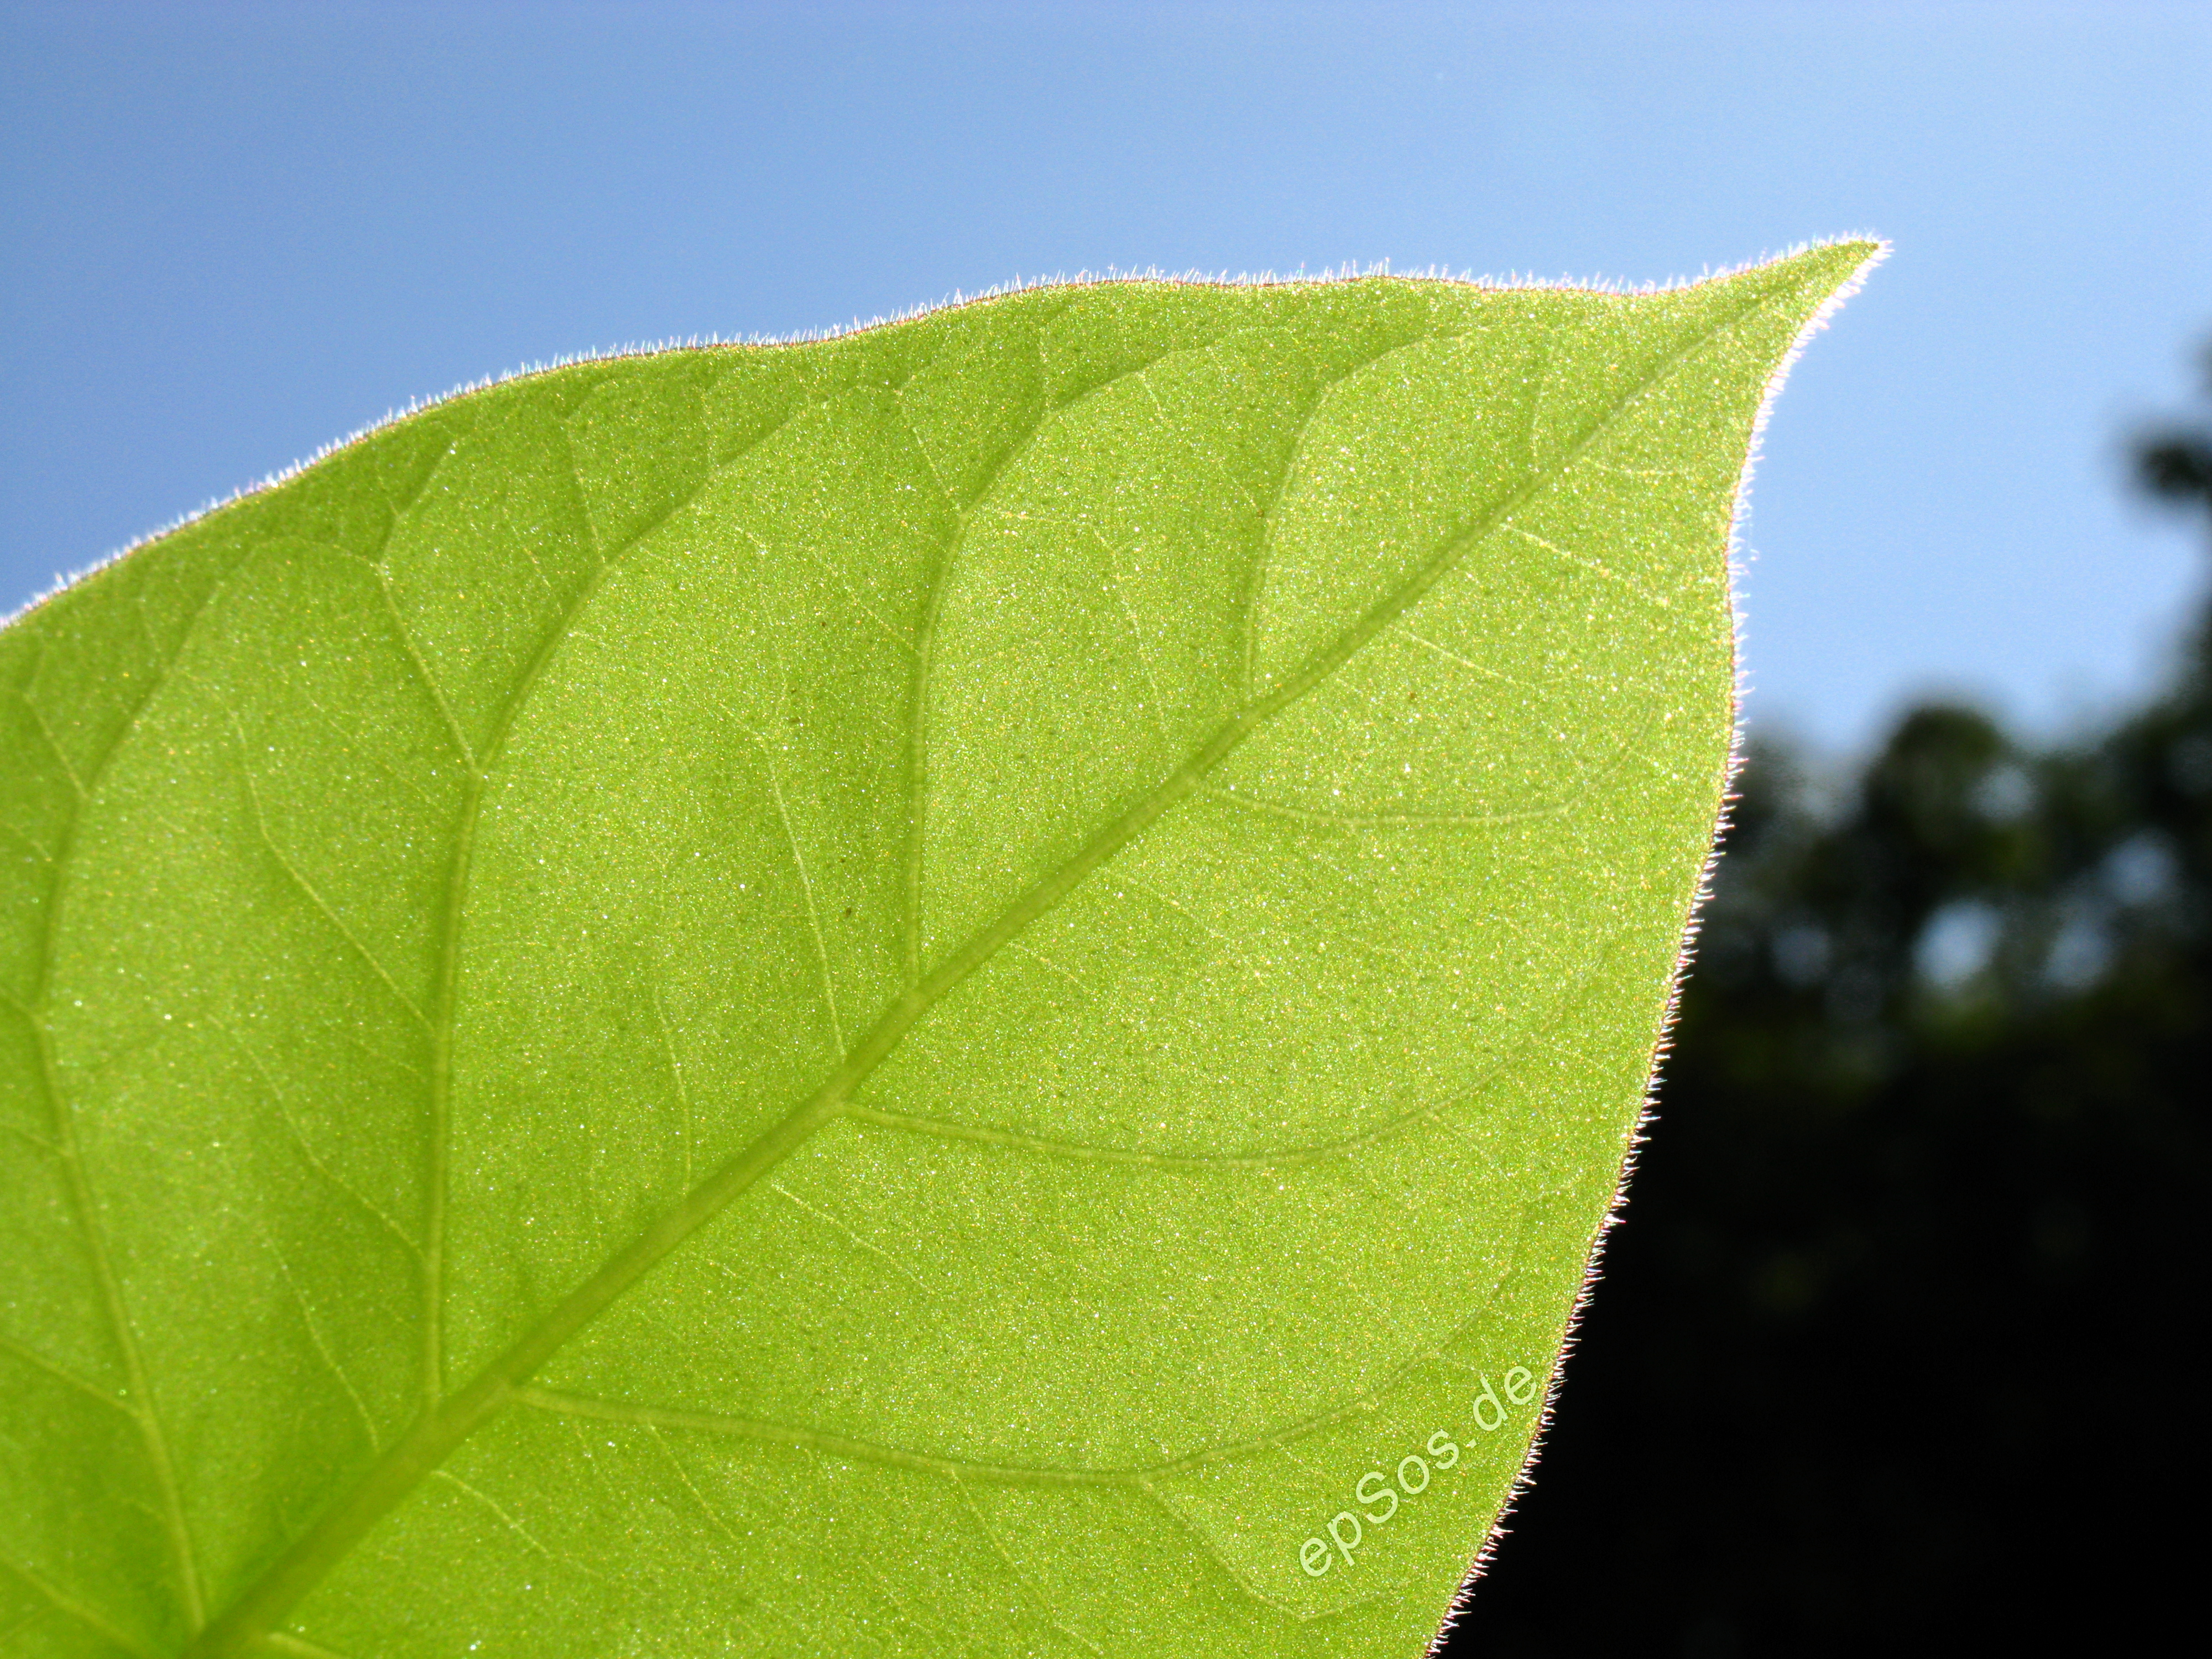 File:Green Leaf of a Bio Plant in Nature.jpg - Wikimedia Commons